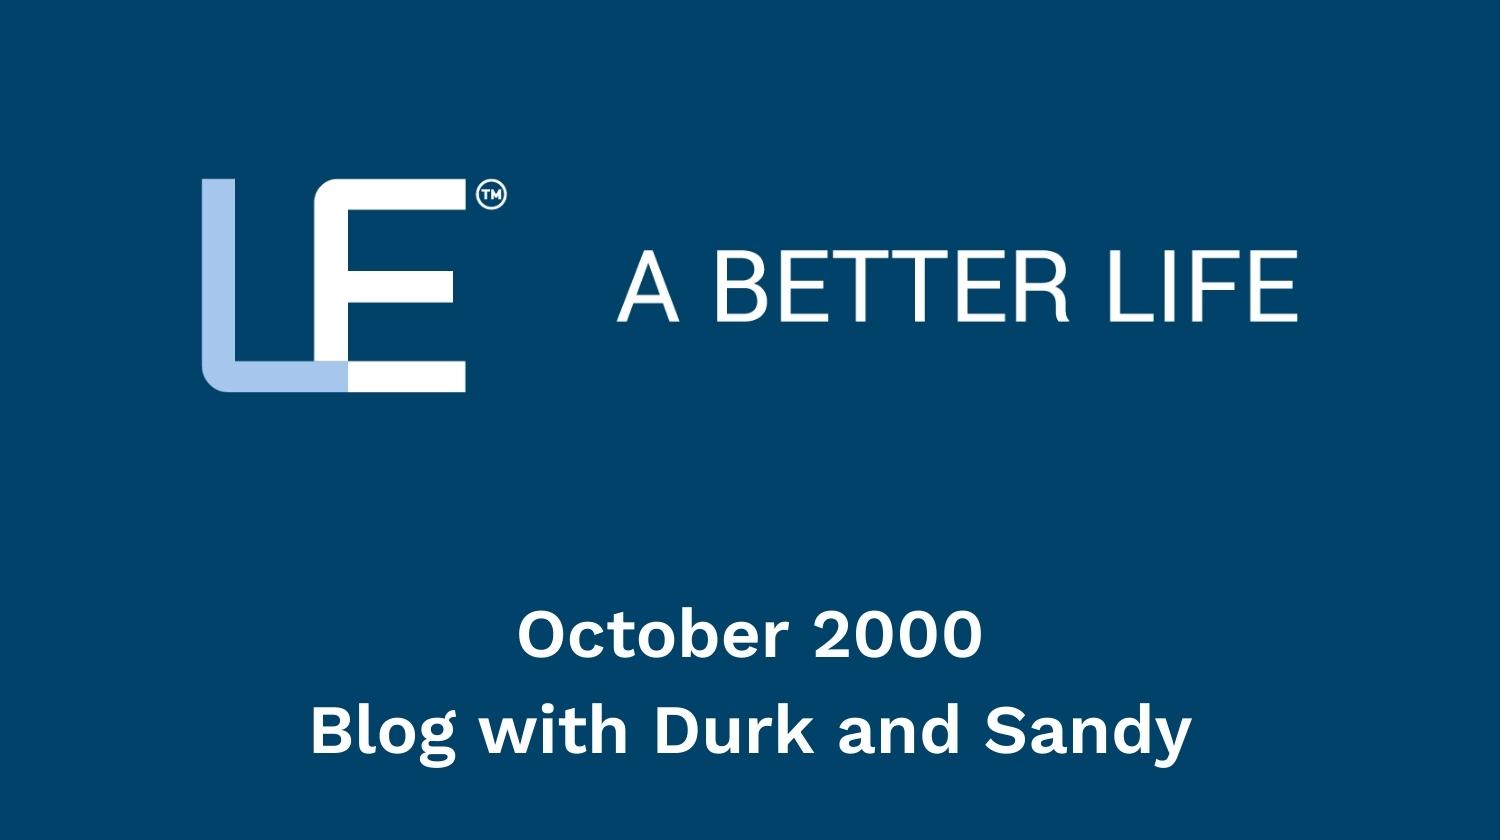 October 2000 Blog with Durk and Sandy